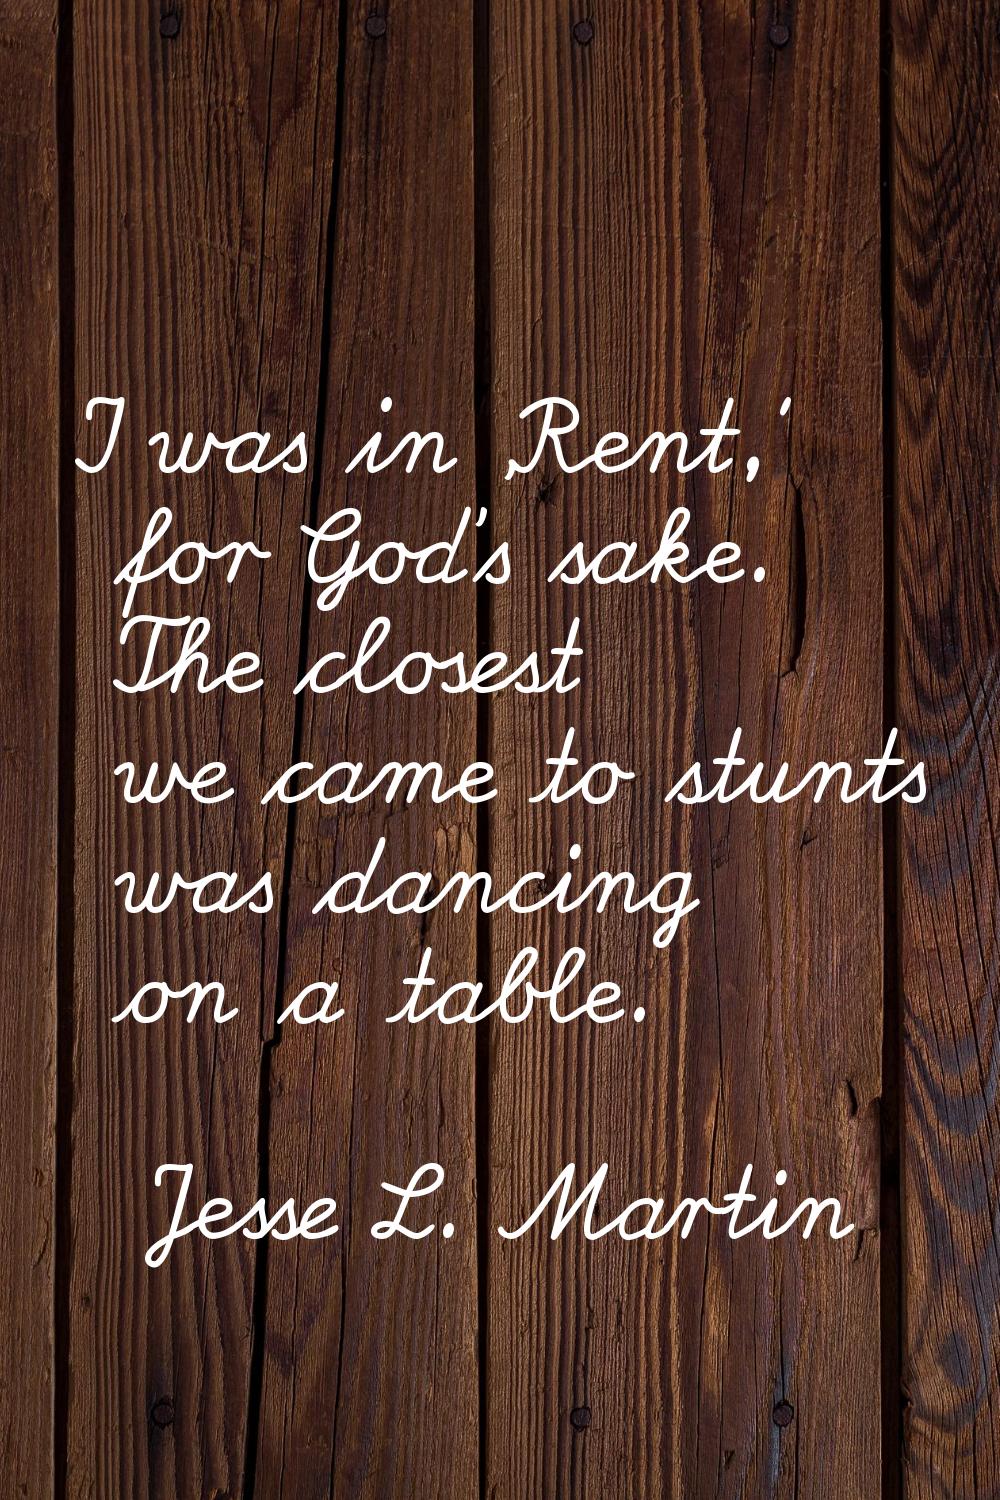 I was in 'Rent,' for God's sake. The closest we came to stunts was dancing on a table.